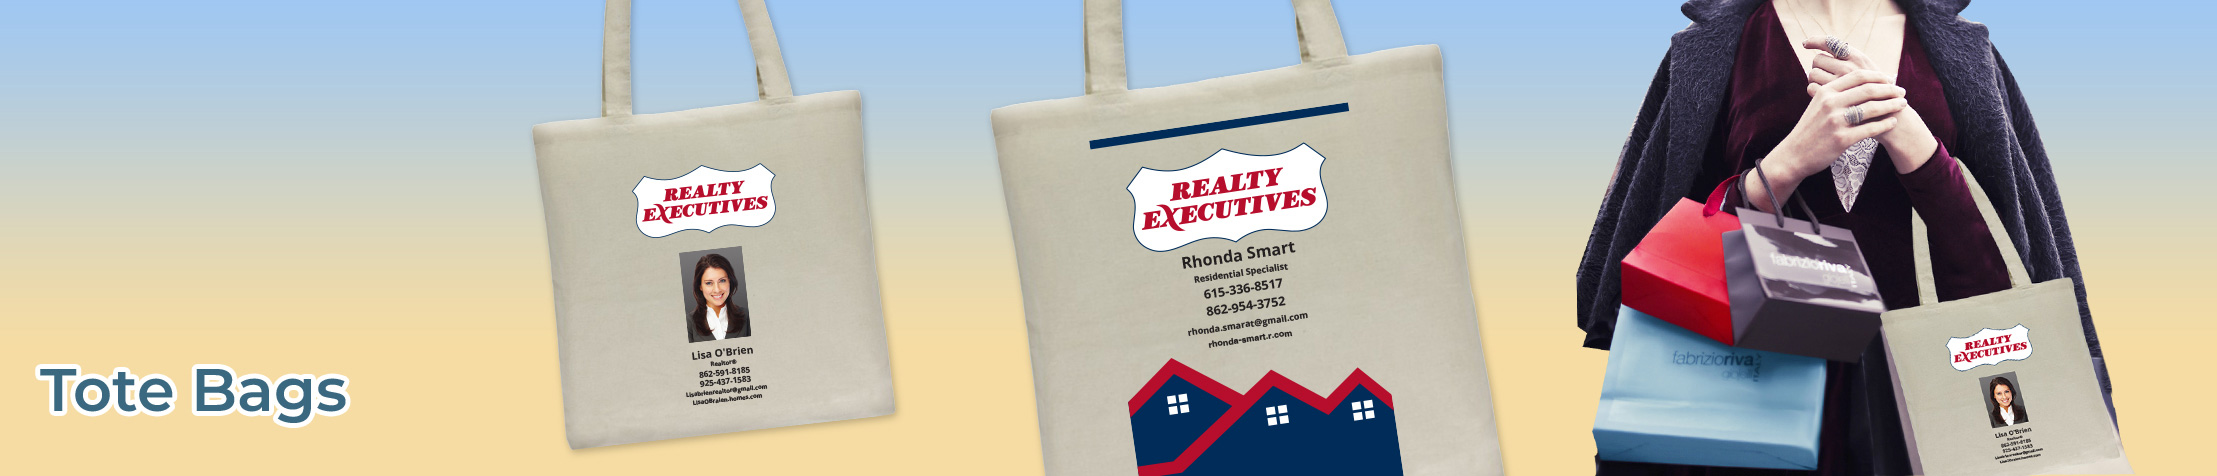 Realty Executives Real Estate Economy Can Cooler - Realty Executives personalized realtor promotional products | BestPrintBuy.com